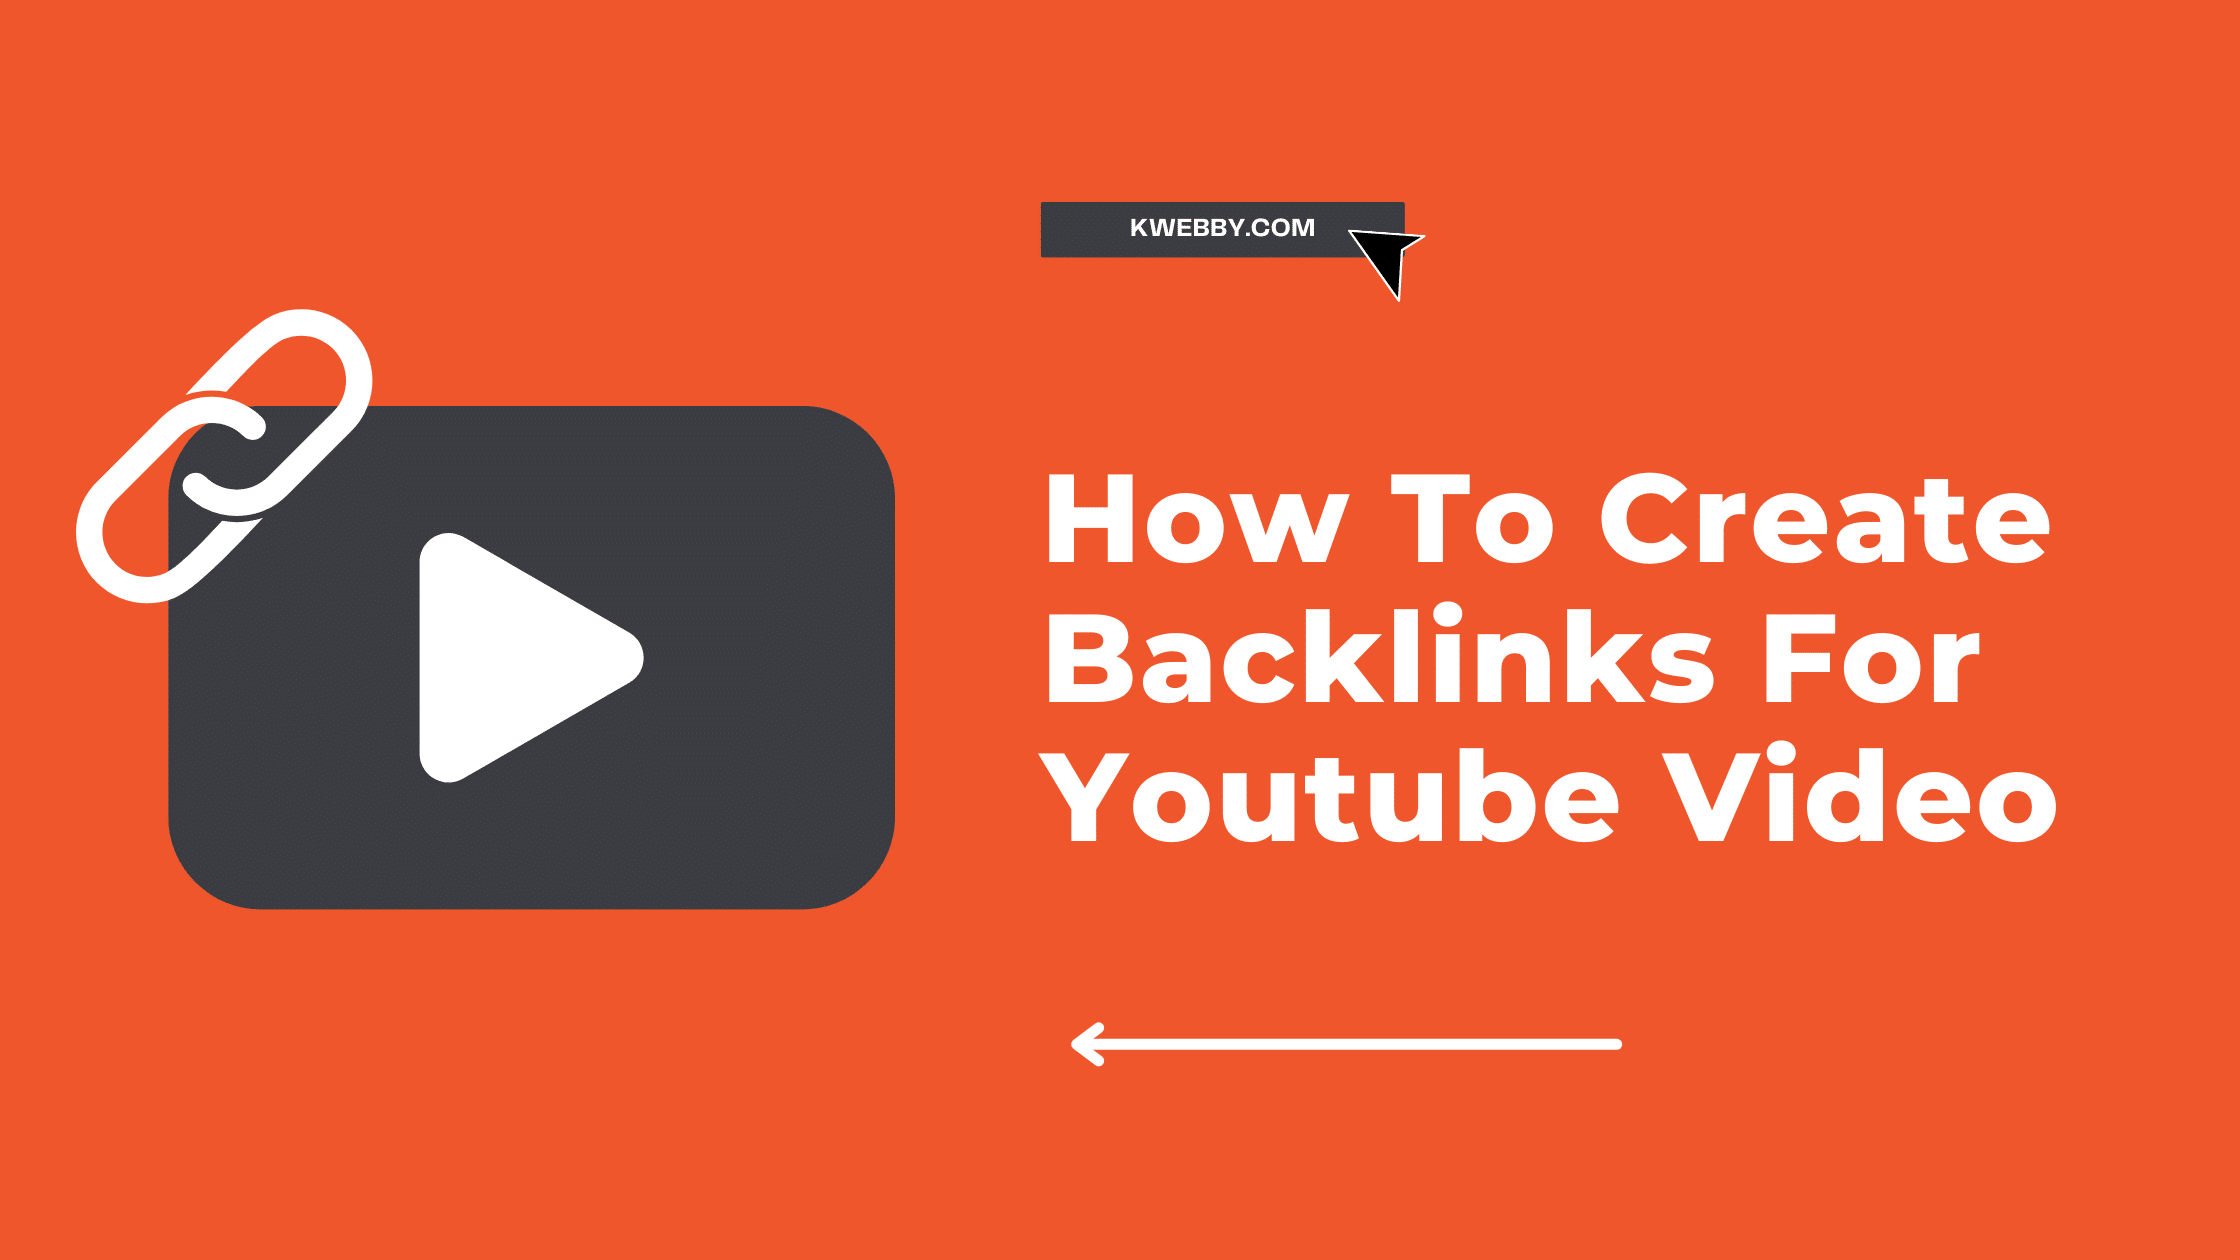 How To Create Backlinks For Youtube Videos in 7 Unbelievable Methods!